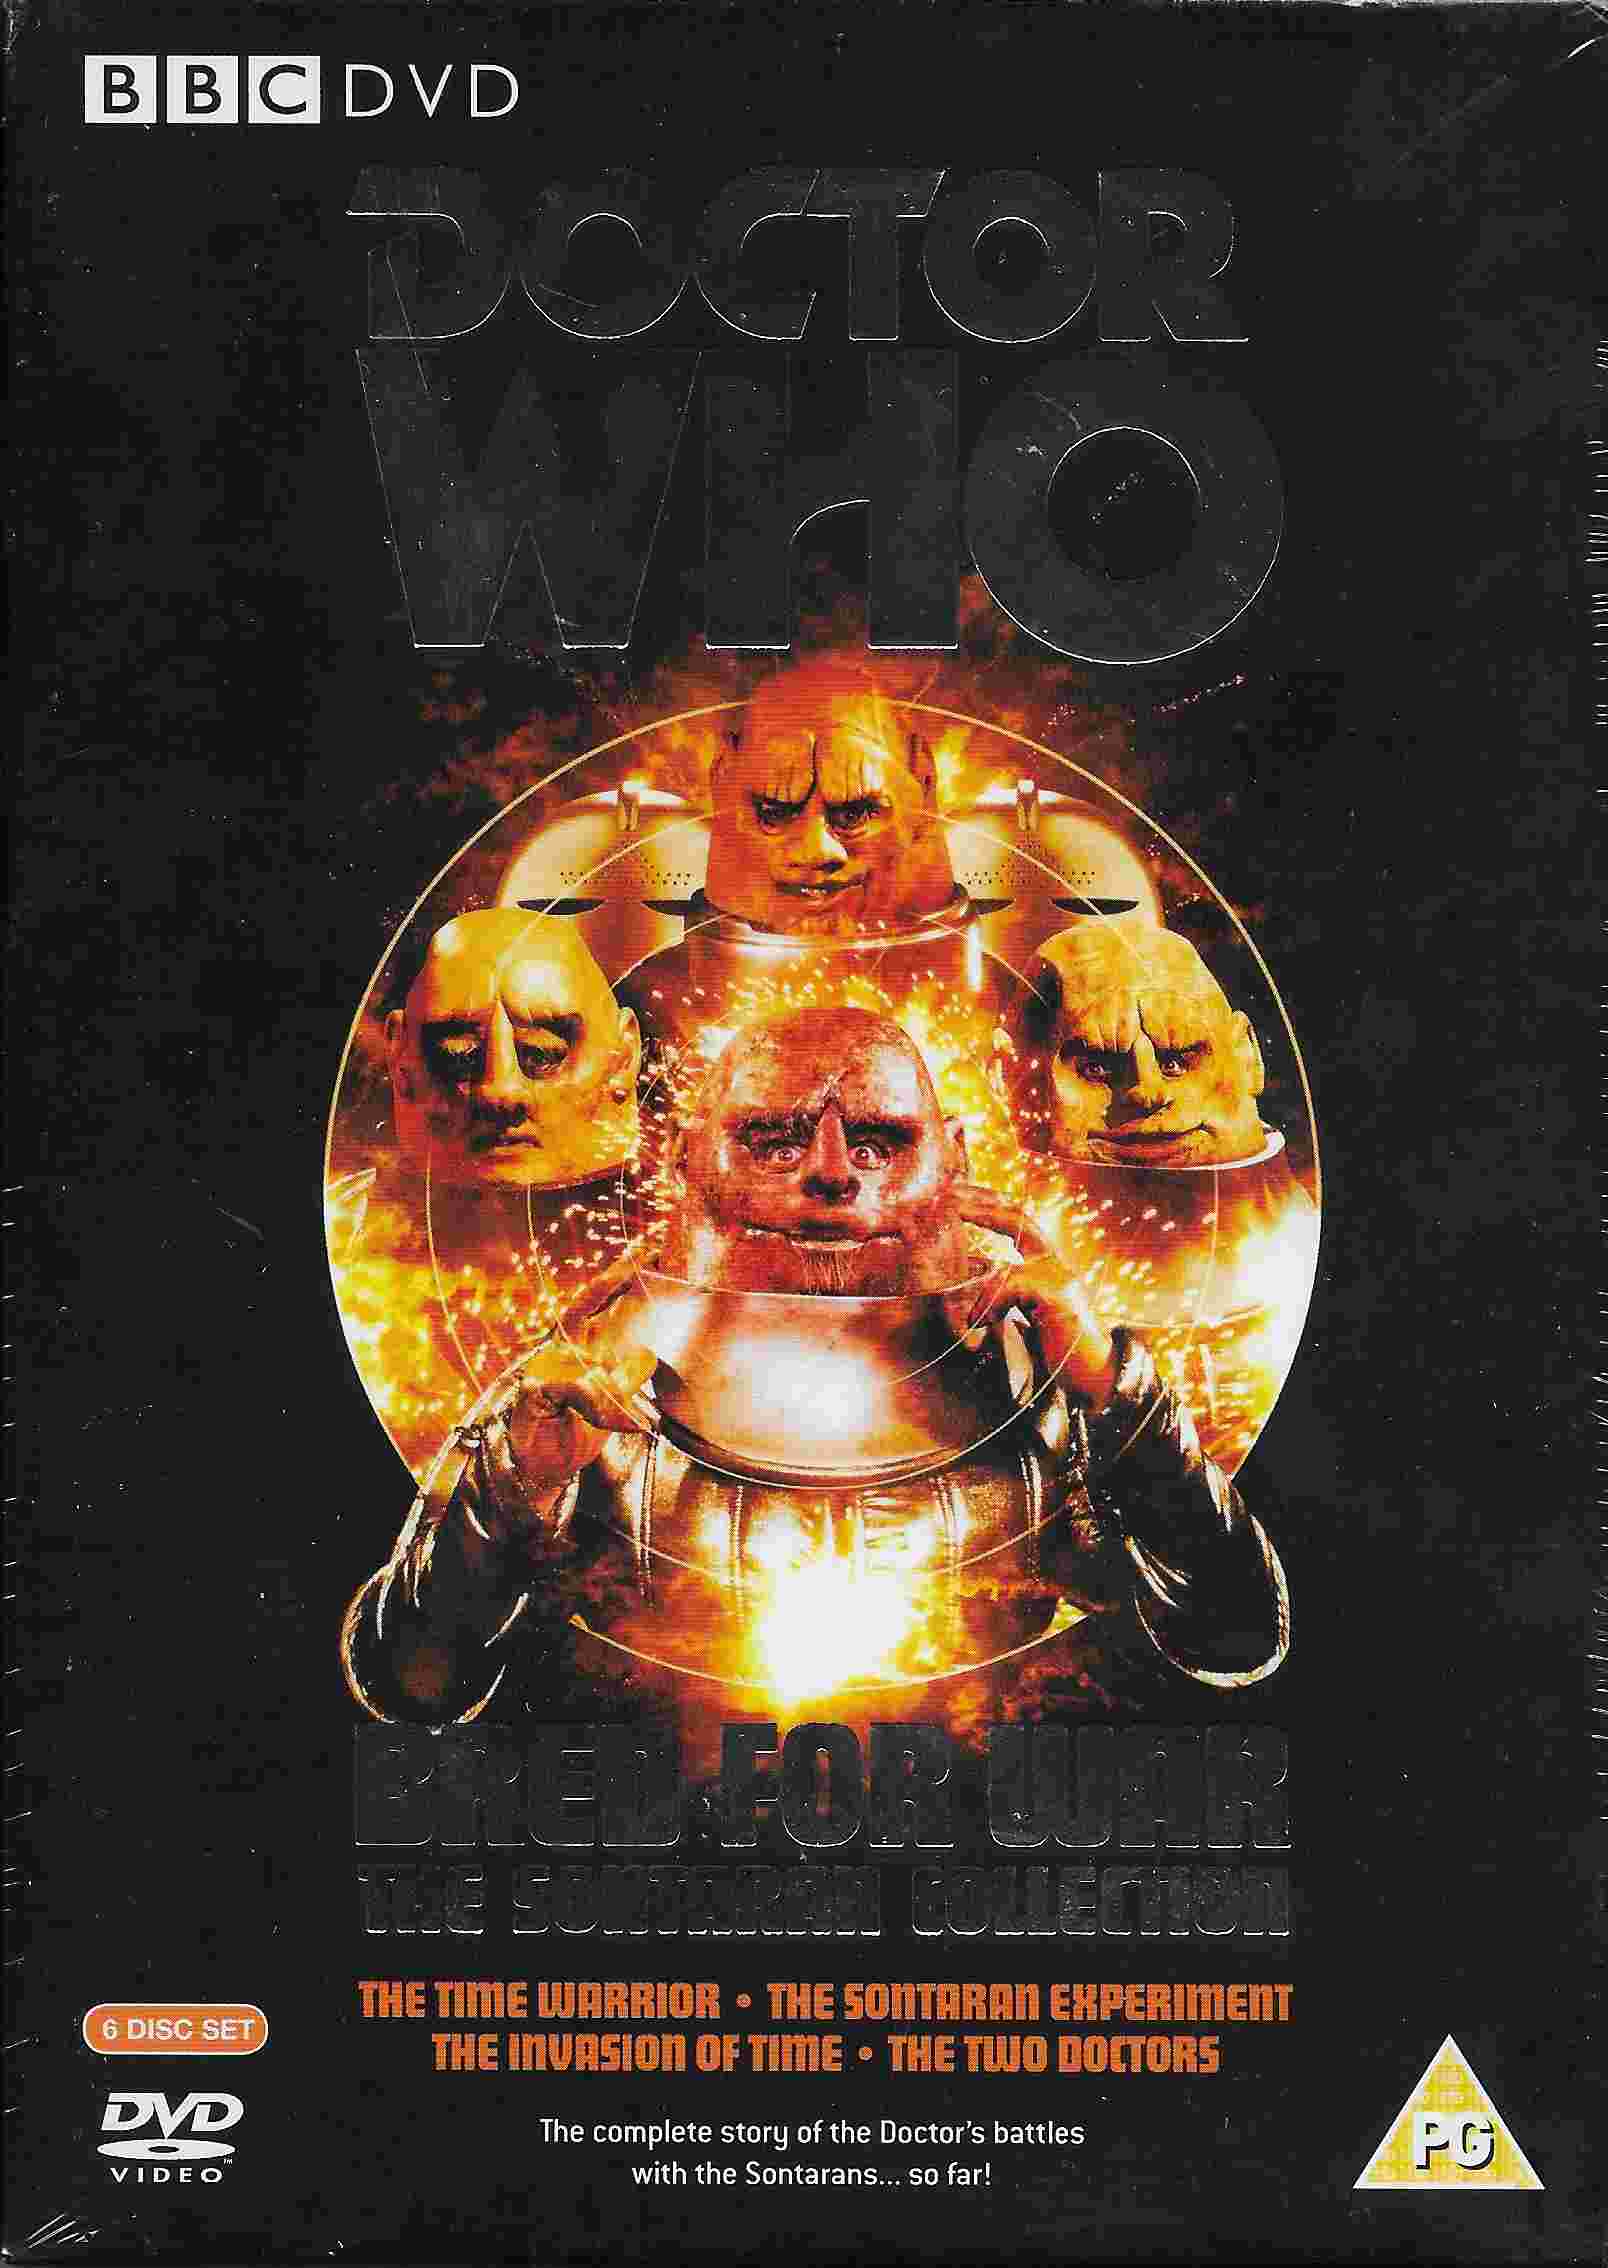 Picture of BBCDVD 2617 Doctor Who - Bred for war the Sontaran collection (Boxed set) by artist Various from the BBC dvds - Records and Tapes library